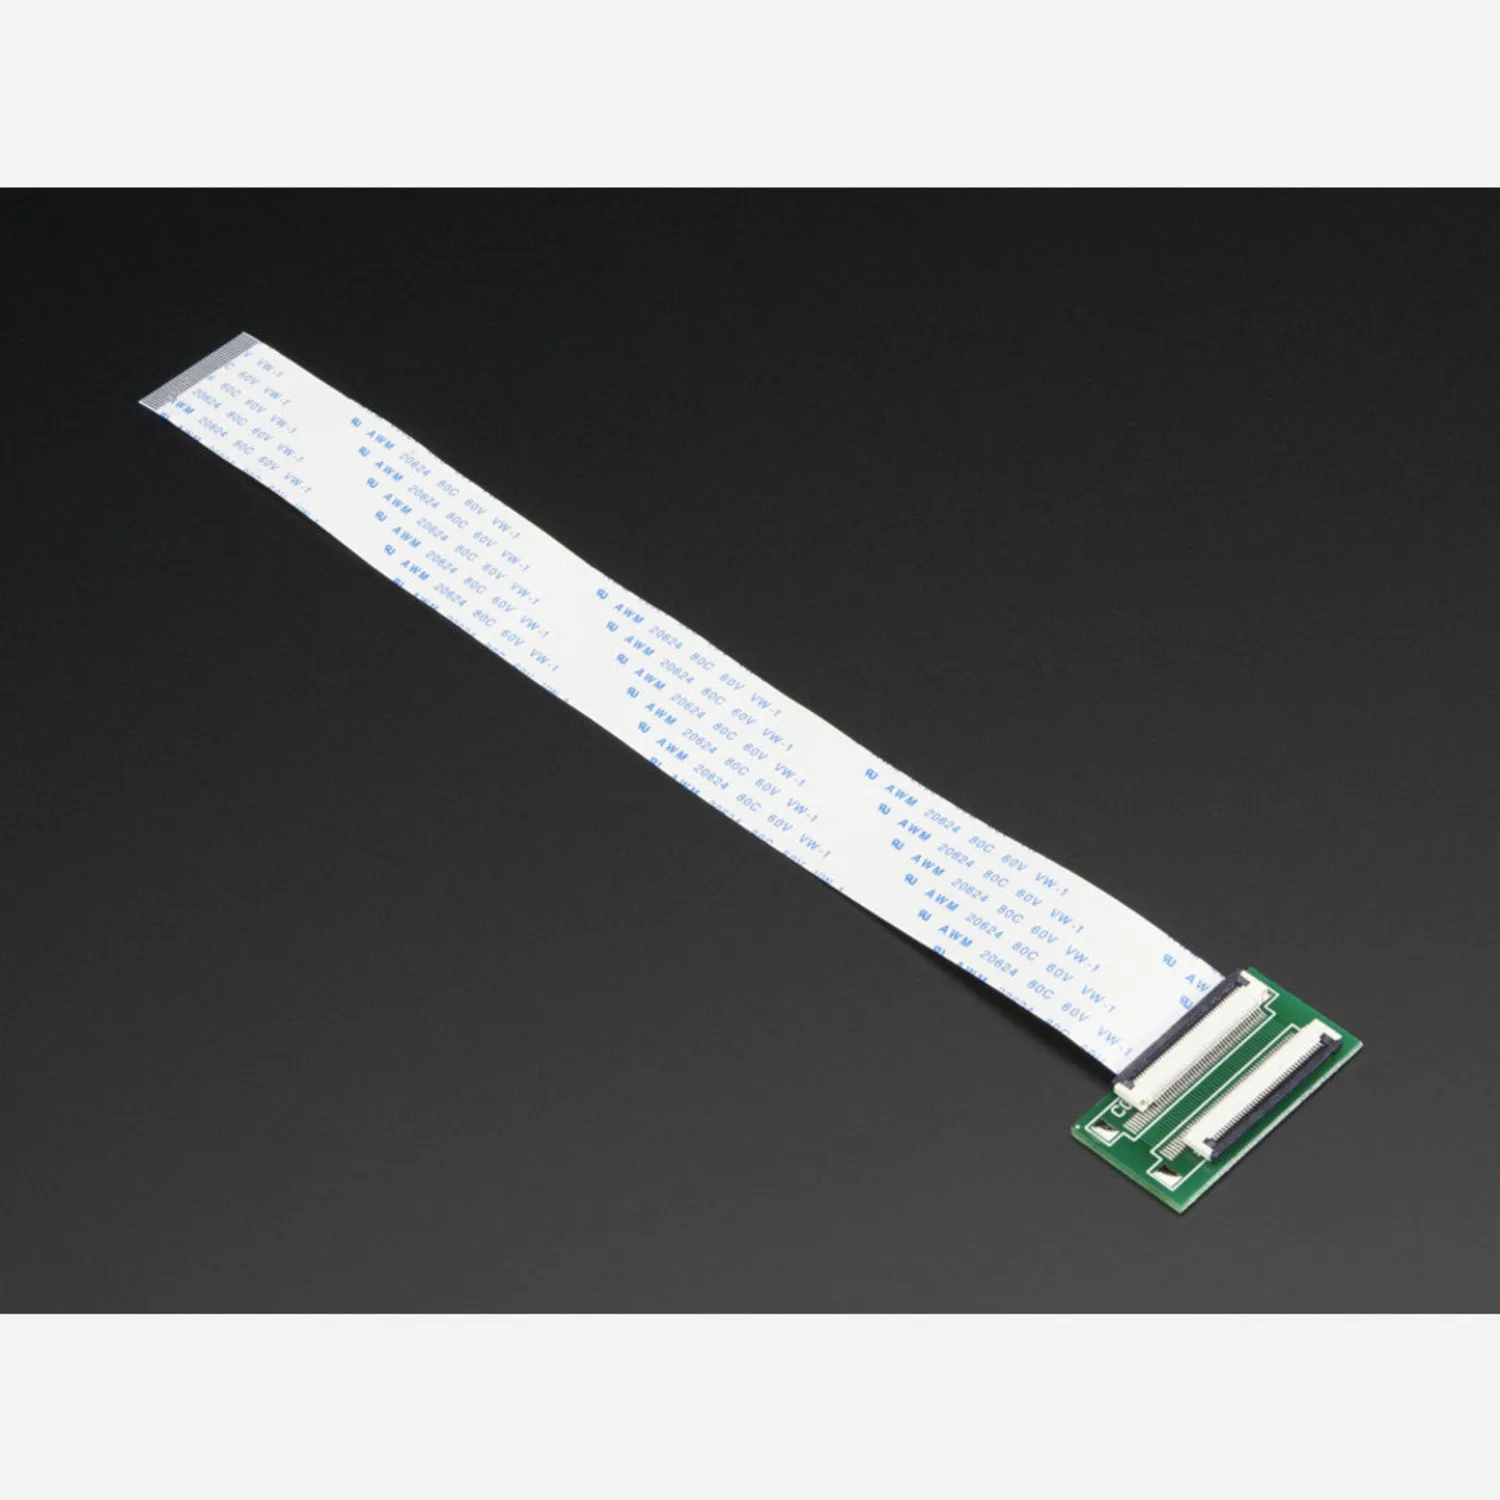 Photo of 40-pin FPC Extension Board + 200mm Cable